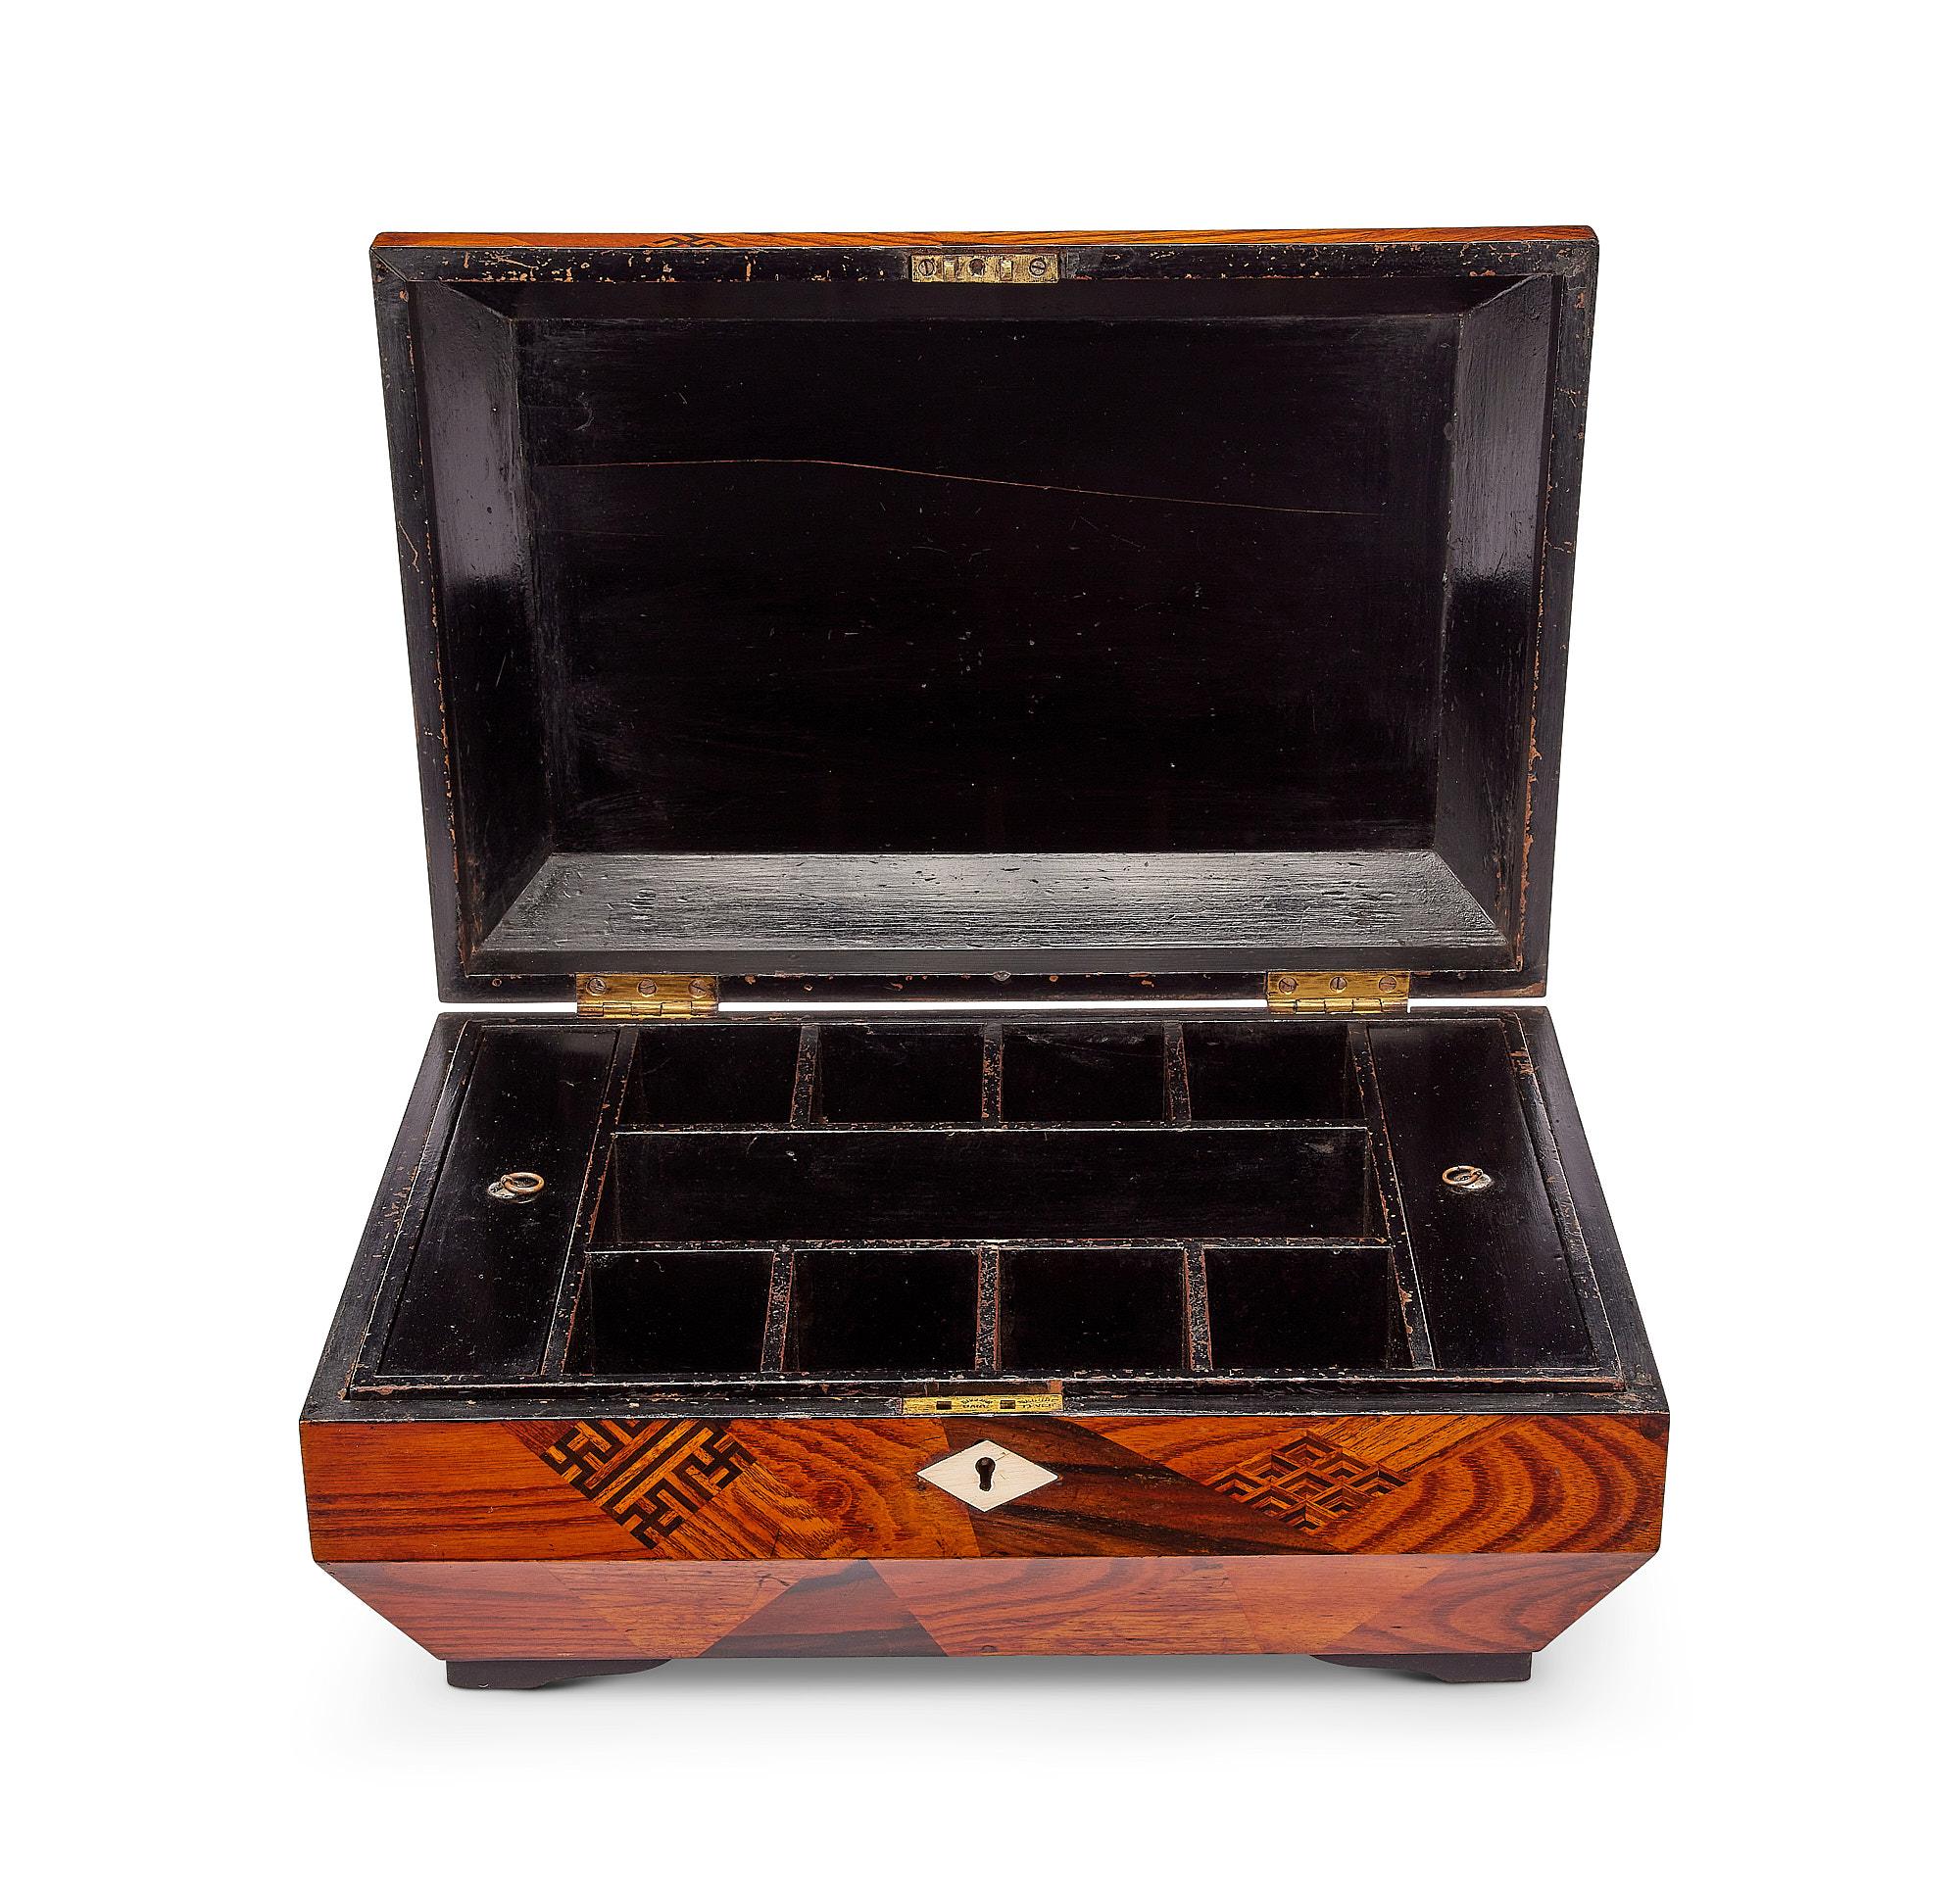 A mid 19th century Japanese export elm and calamander parquetry workbox with a divided interior and lift out tray.

This charming box would work either as a jewllery or workbox, the interior comprises a lift out tray divided with eight small